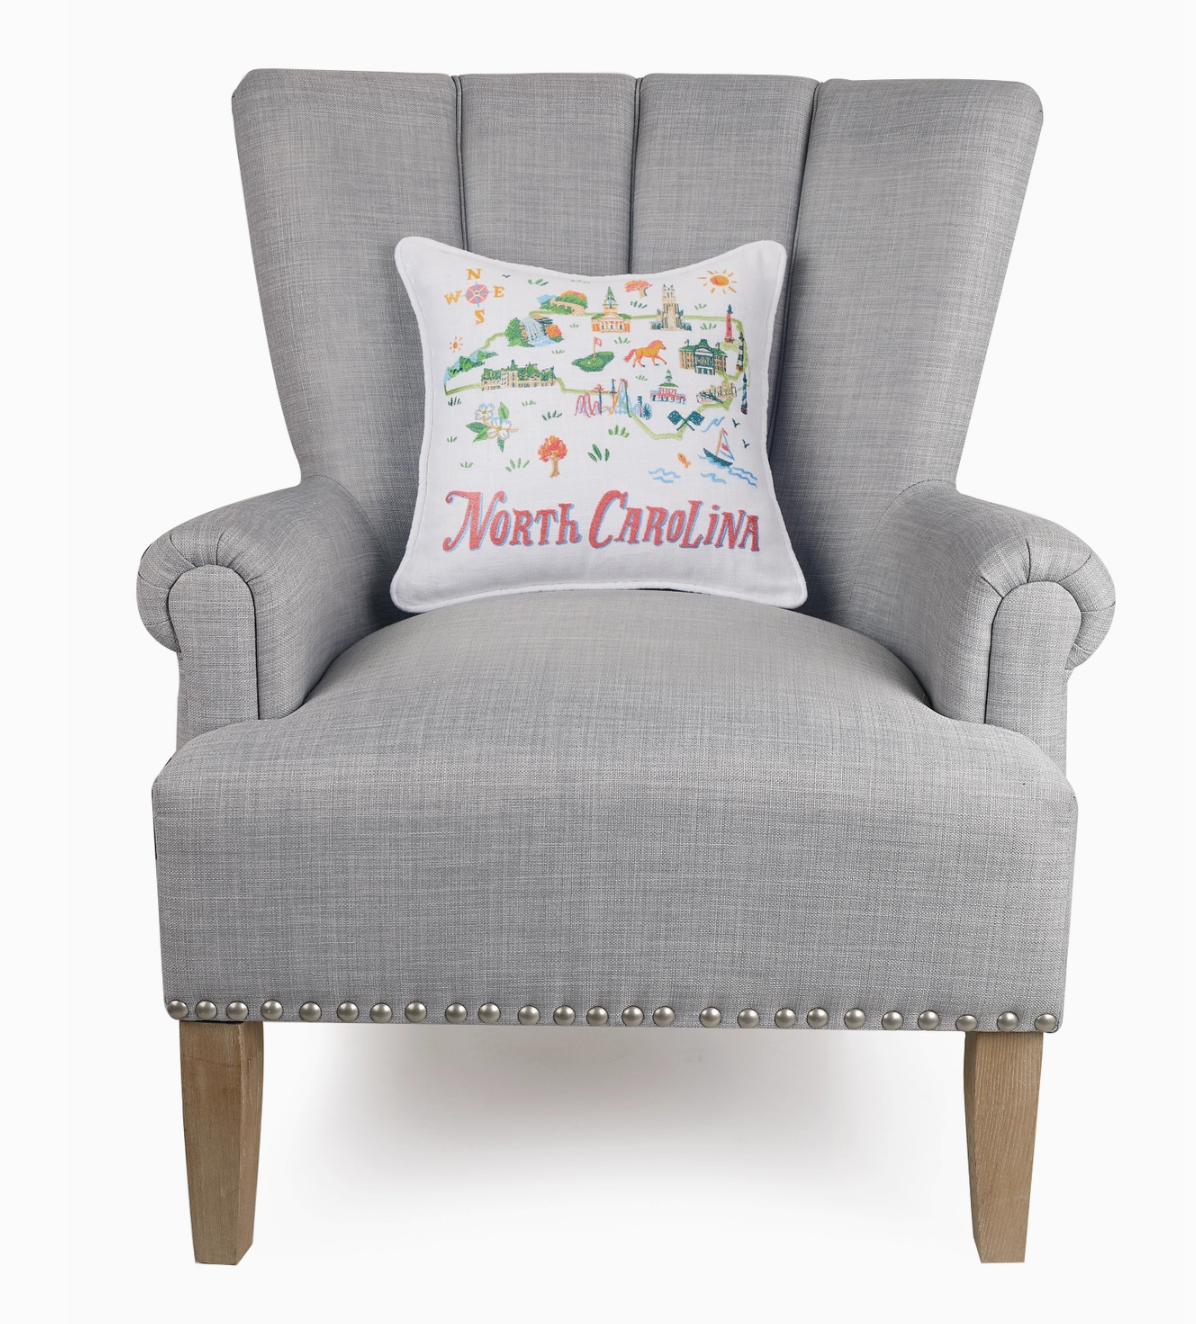 NC Embroidered Pillow